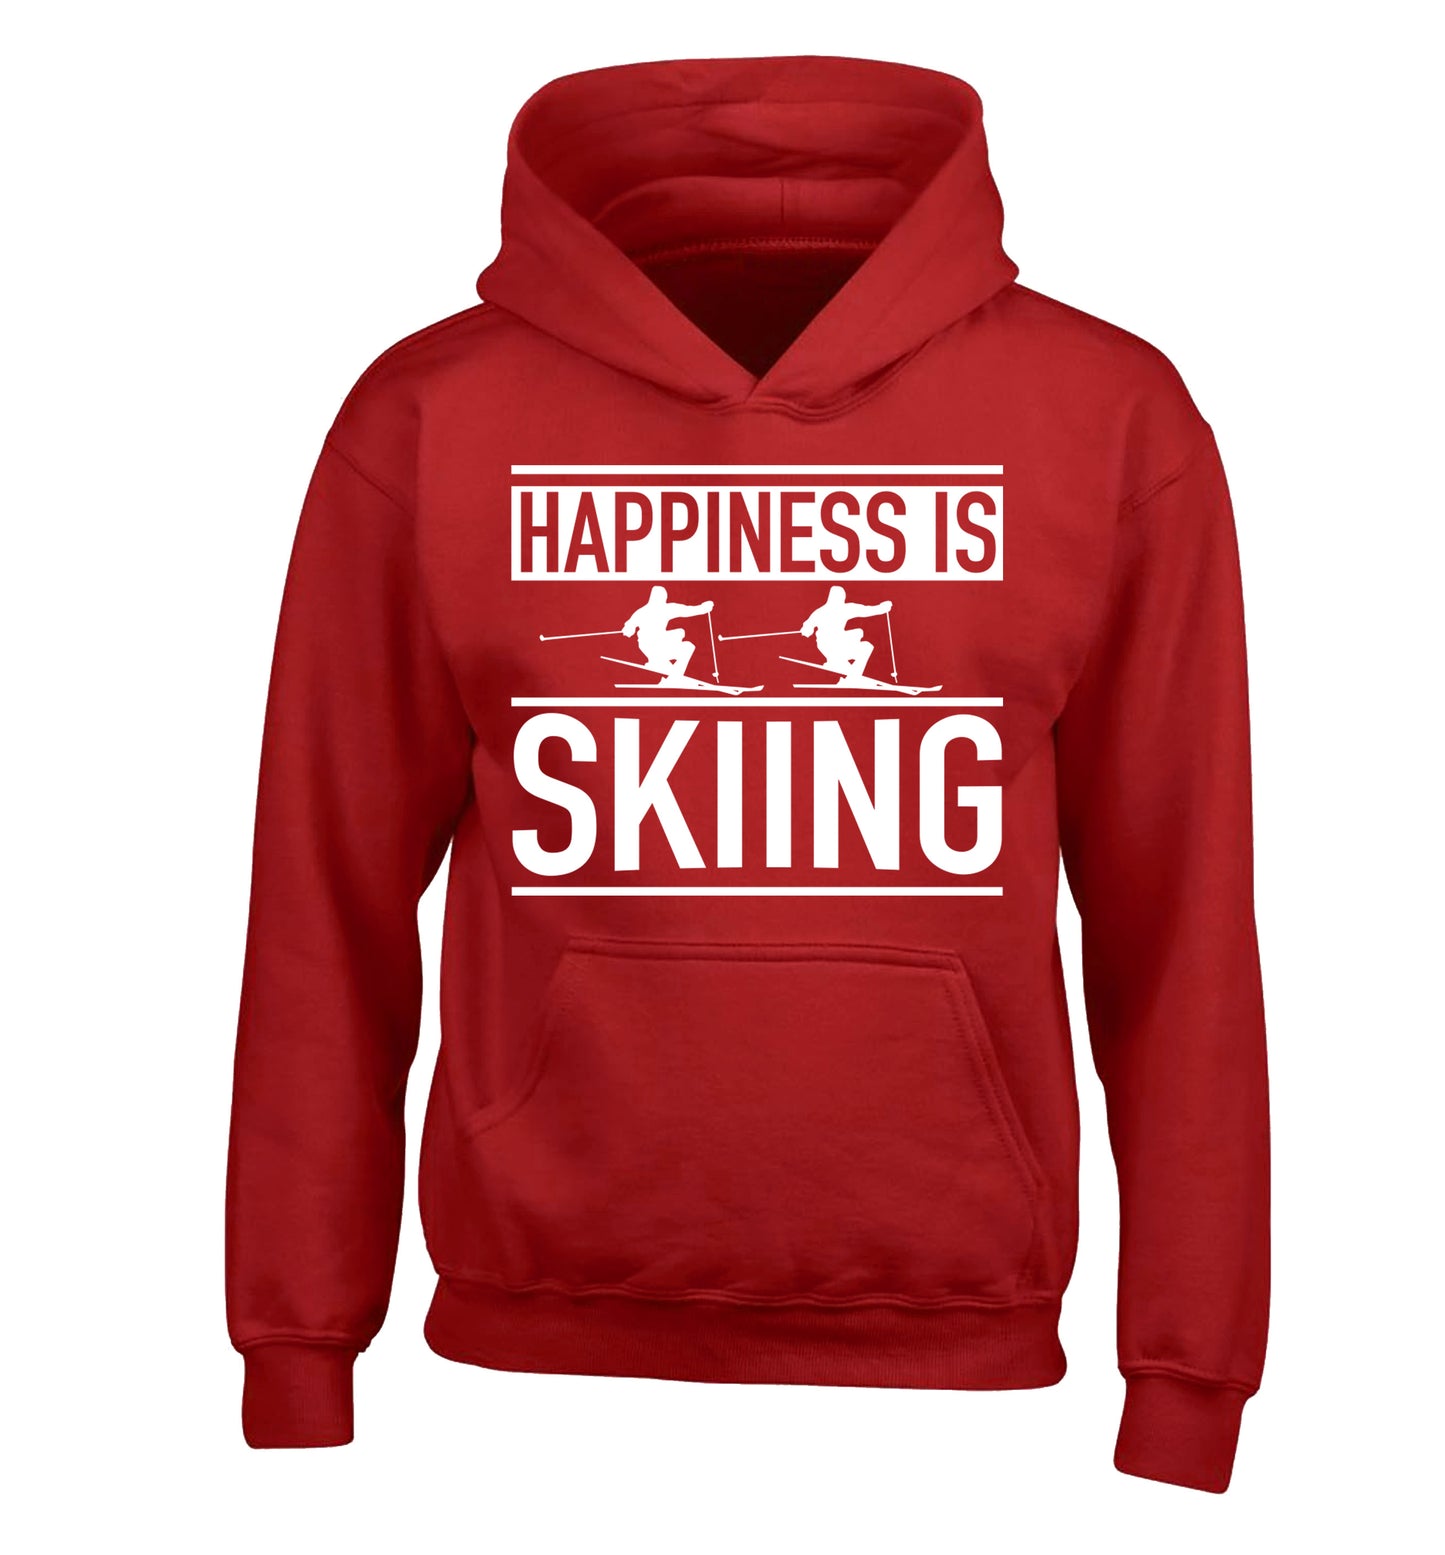 Happiness is skiing children's red hoodie 12-14 Years